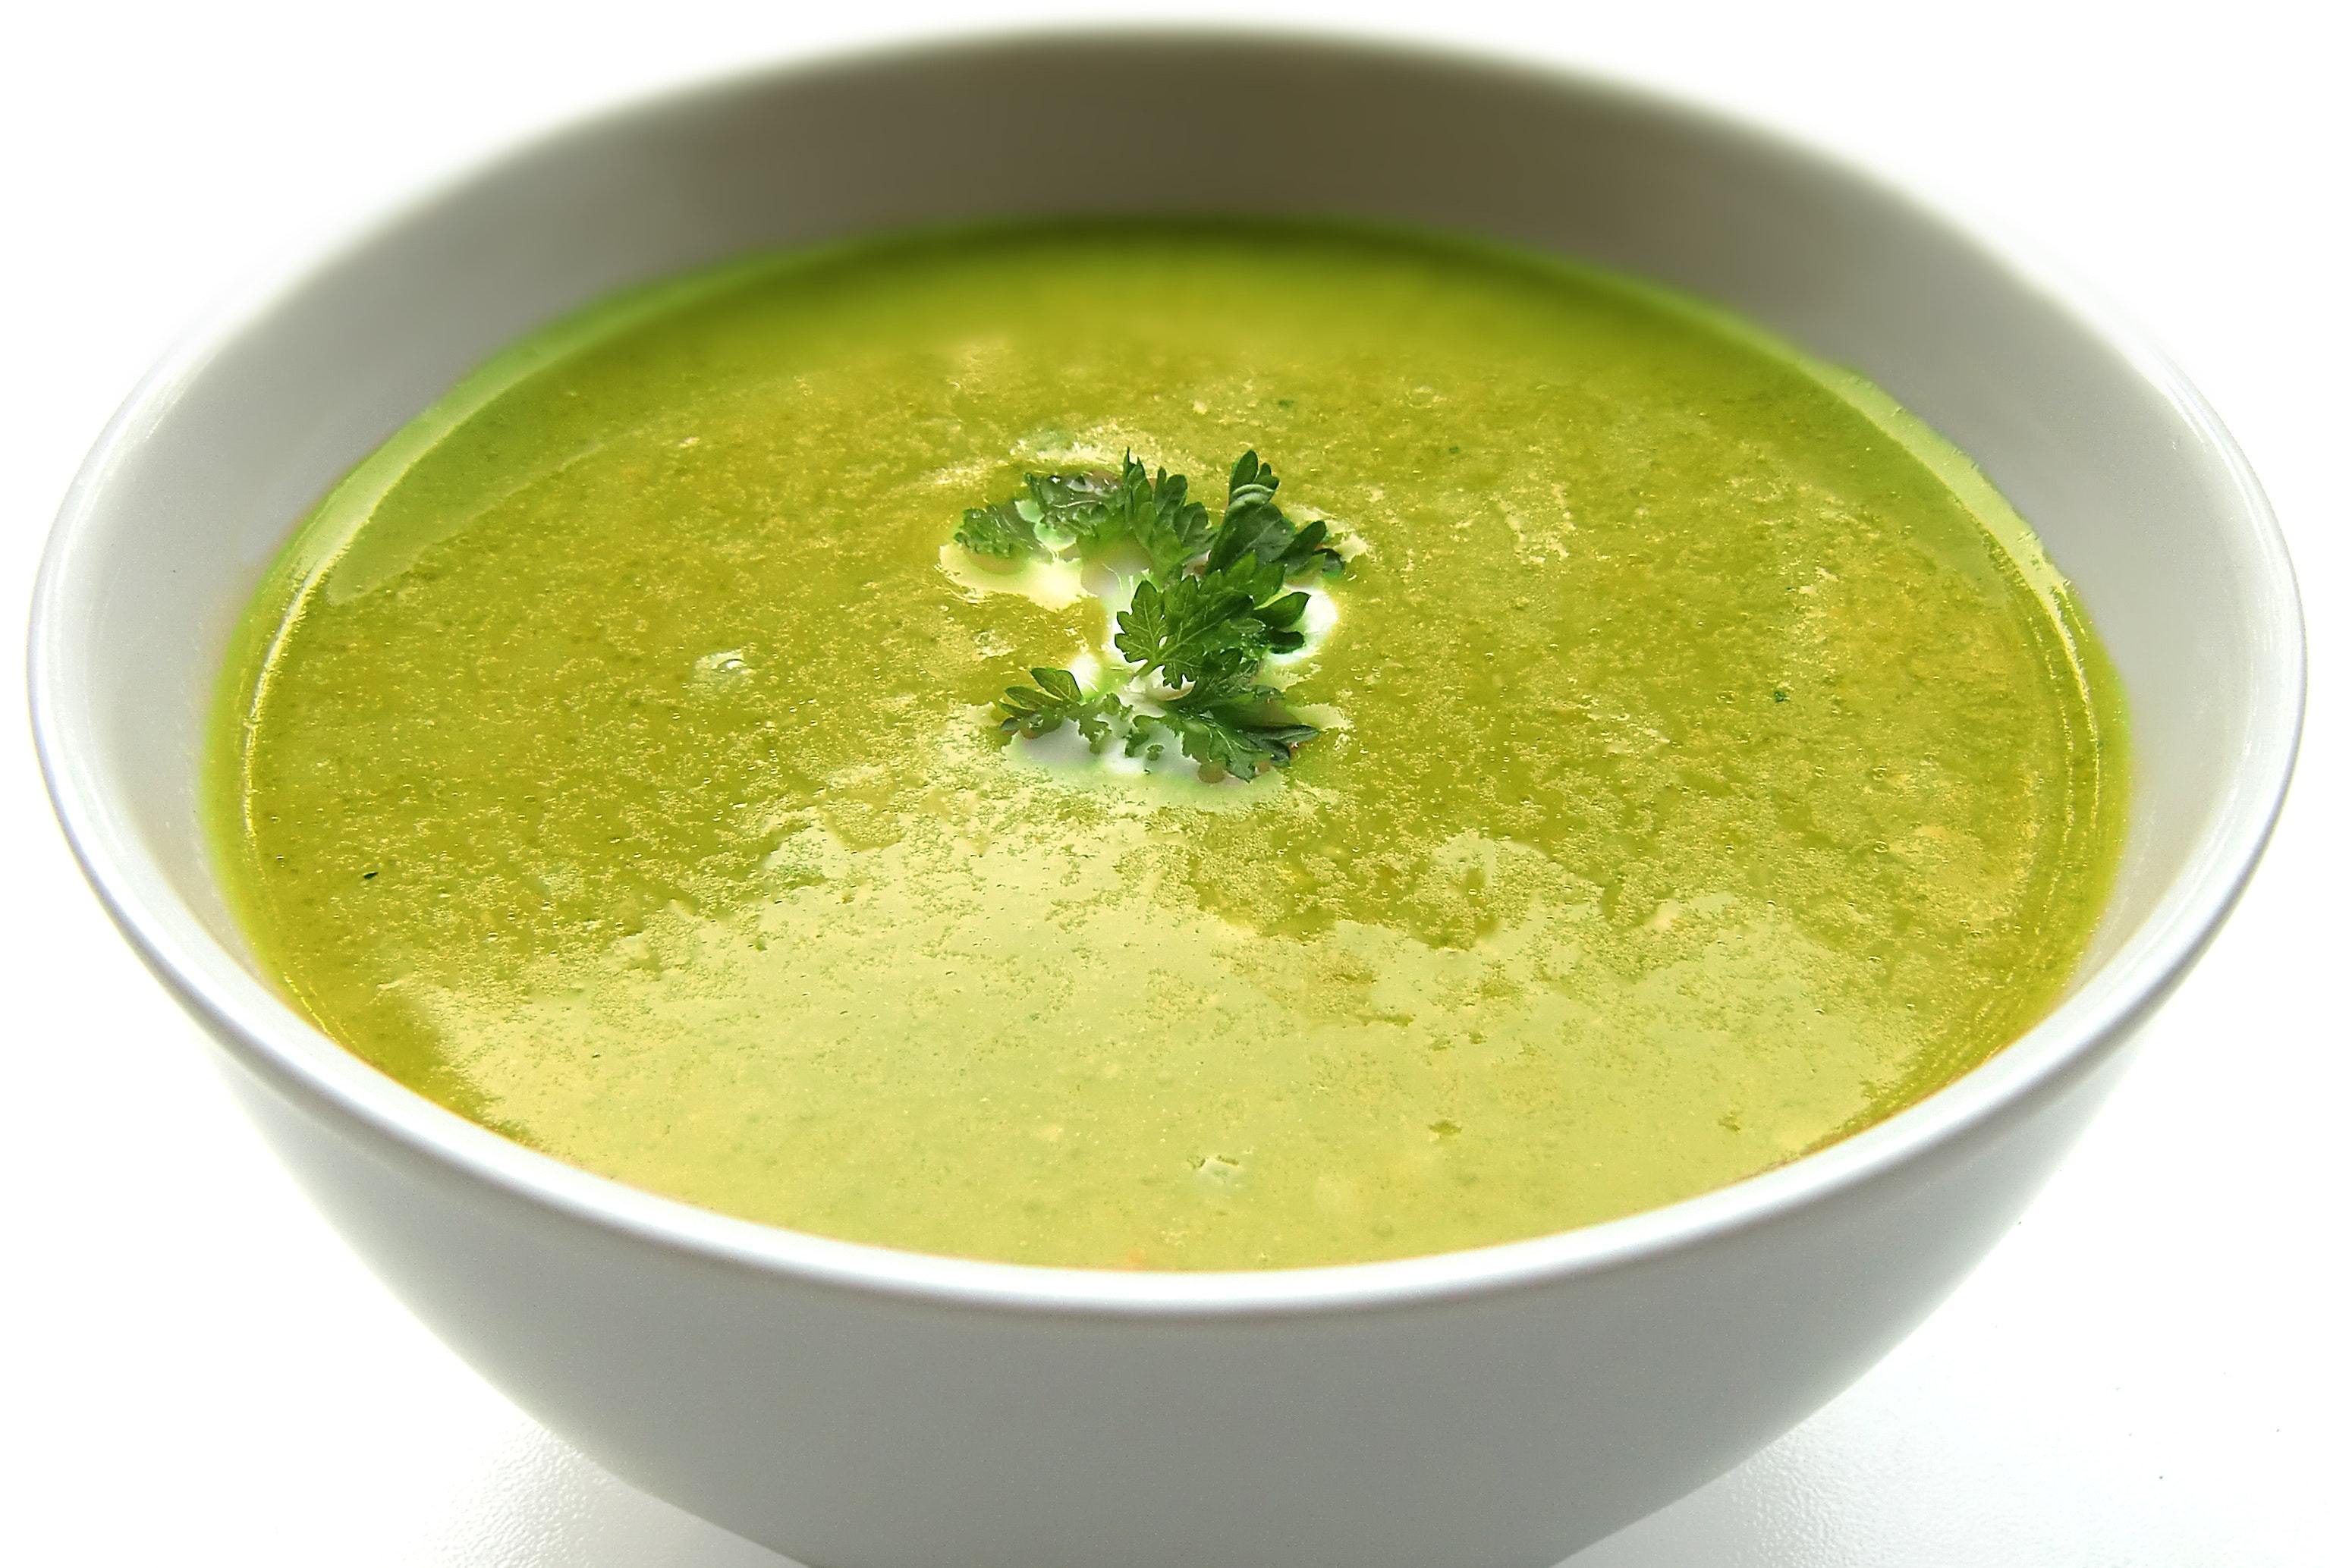 Summer soups - the perfect lunch